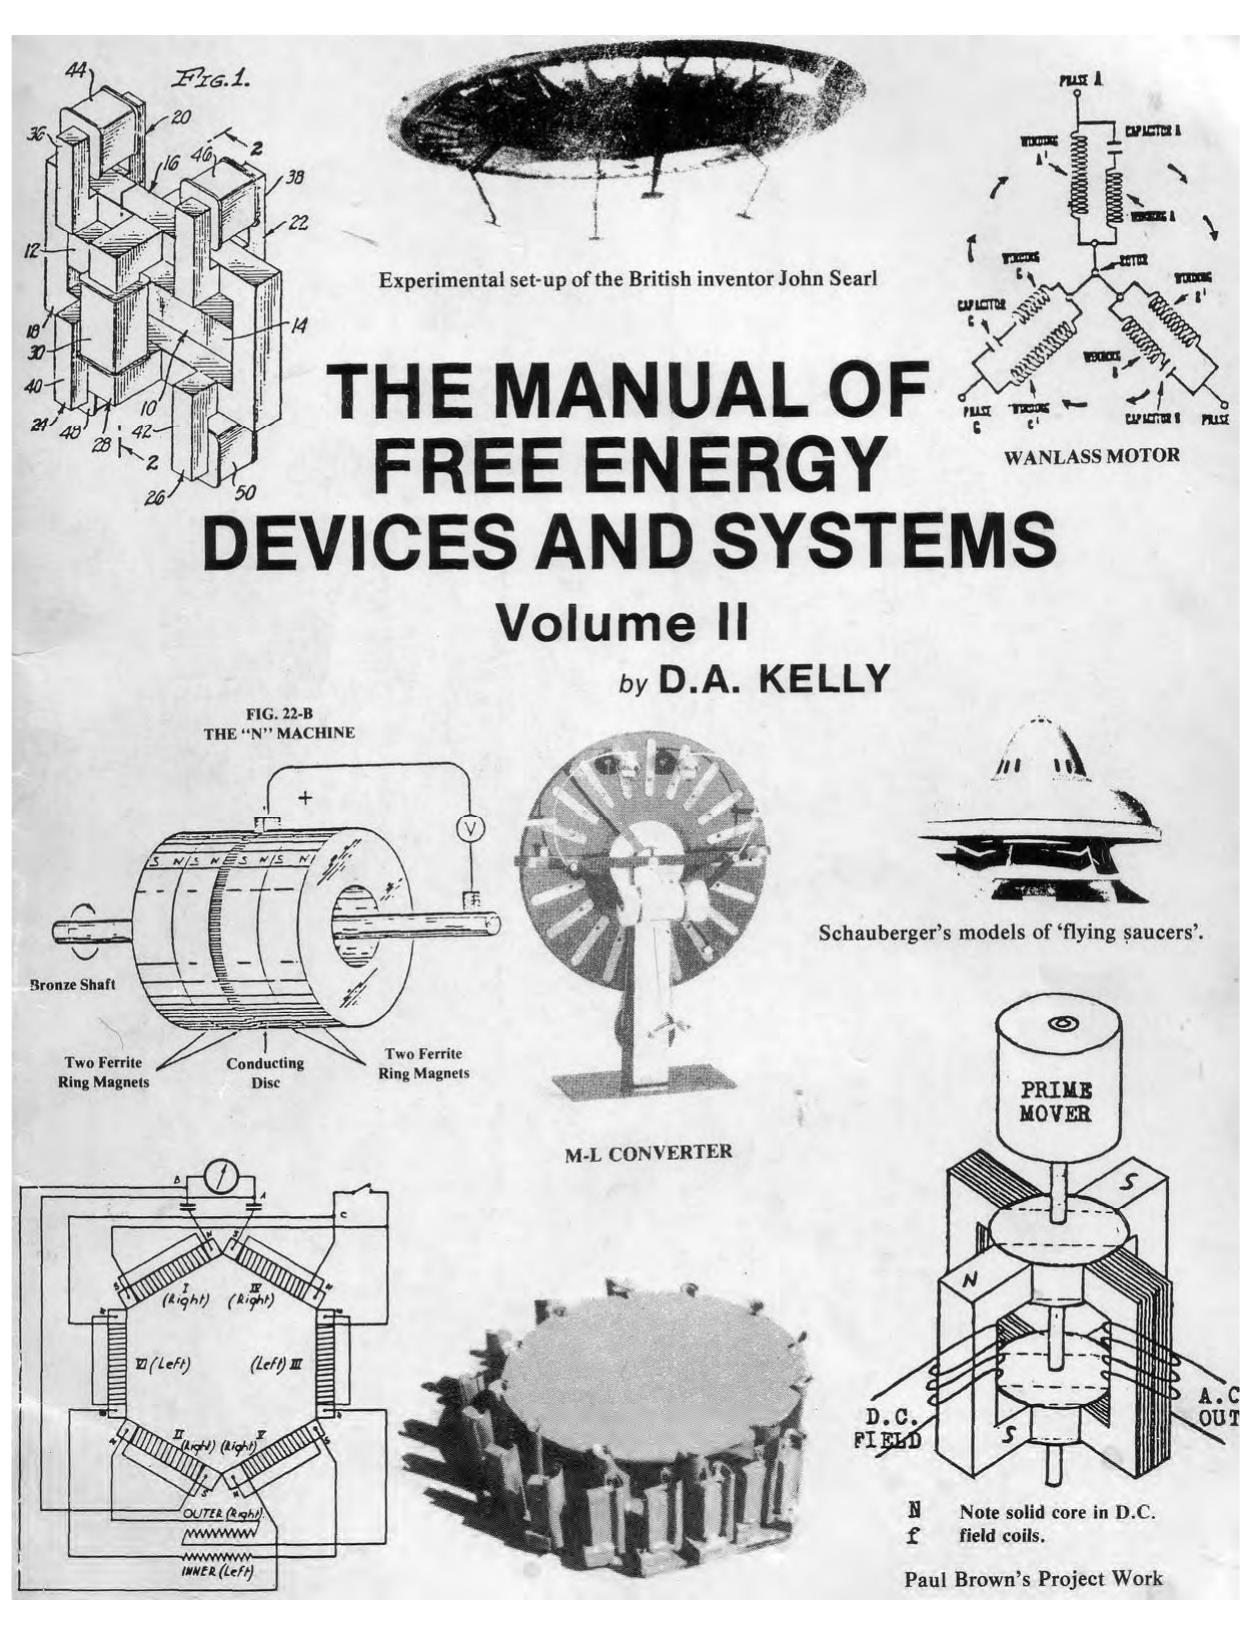 Manual of Free Energy Devices